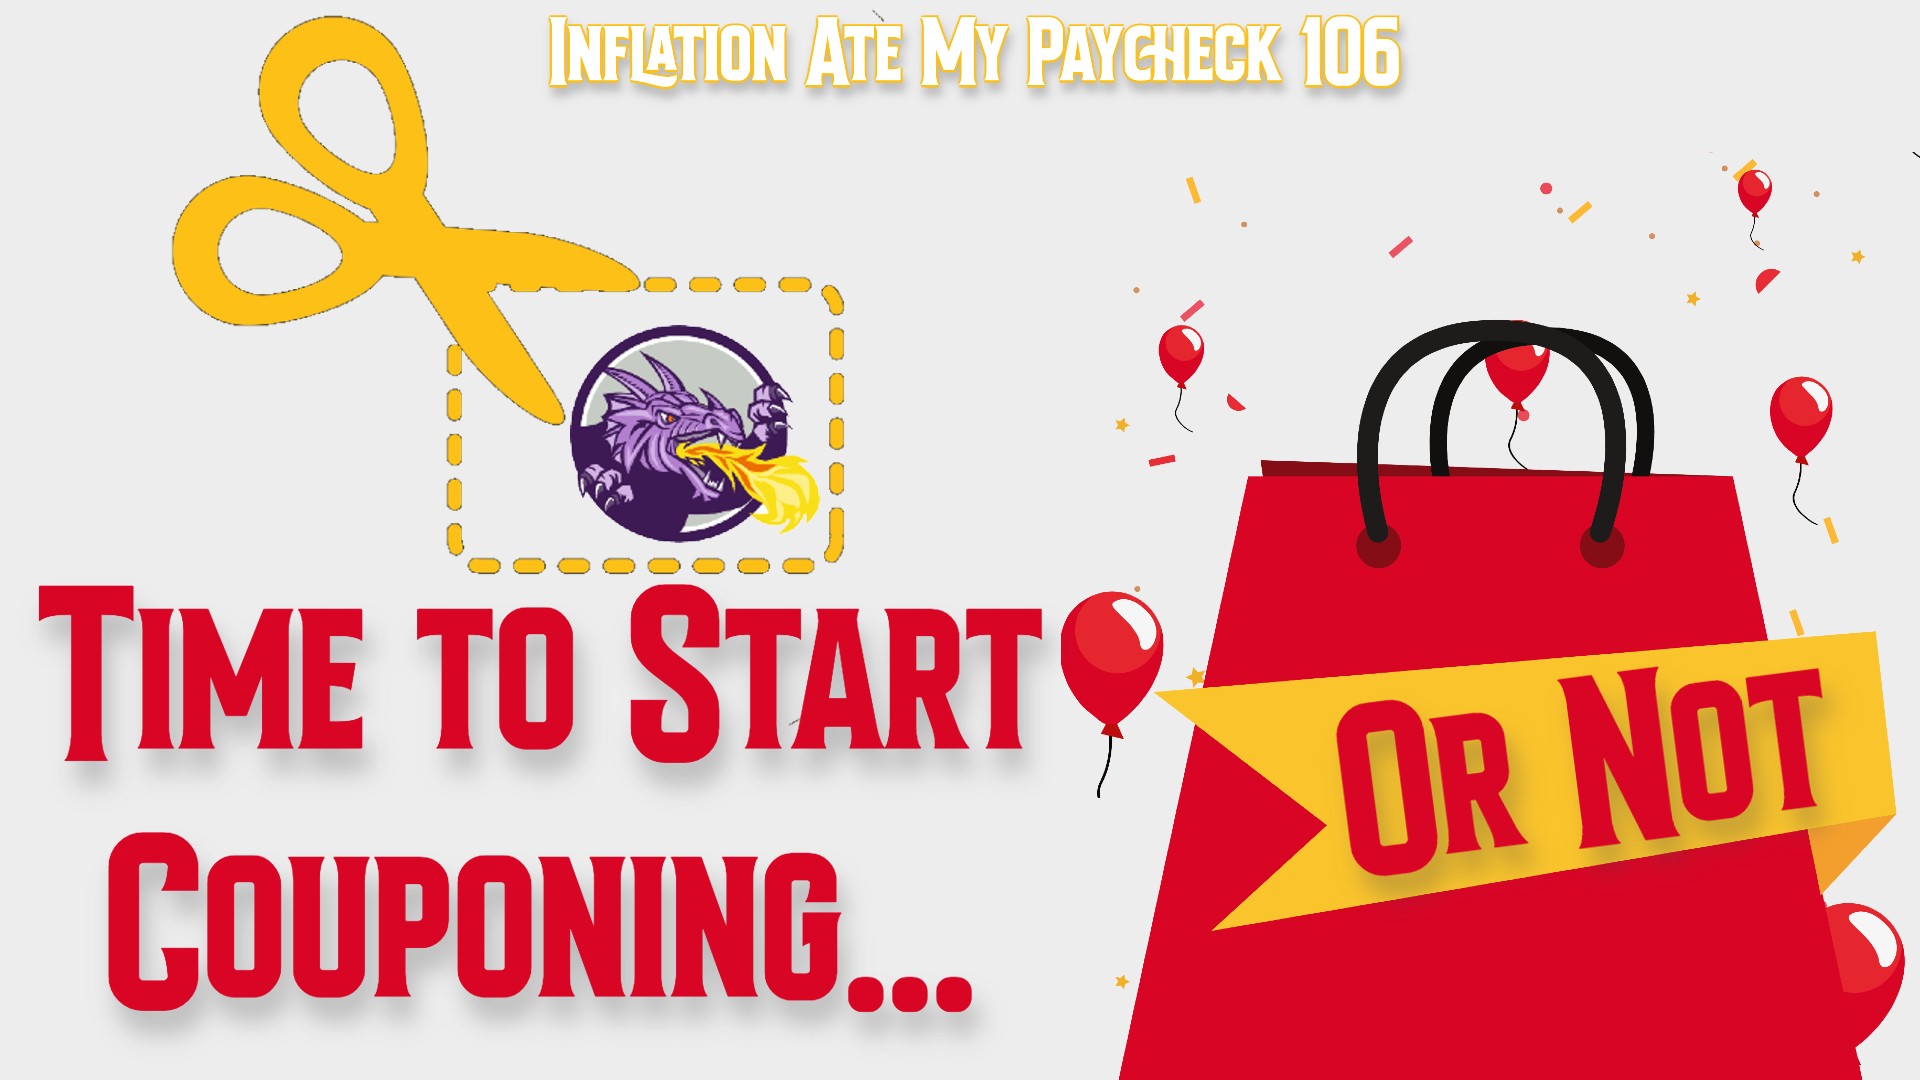 Inflation Ate My Paycheck 106: Time to Start Couponing.. Or Not